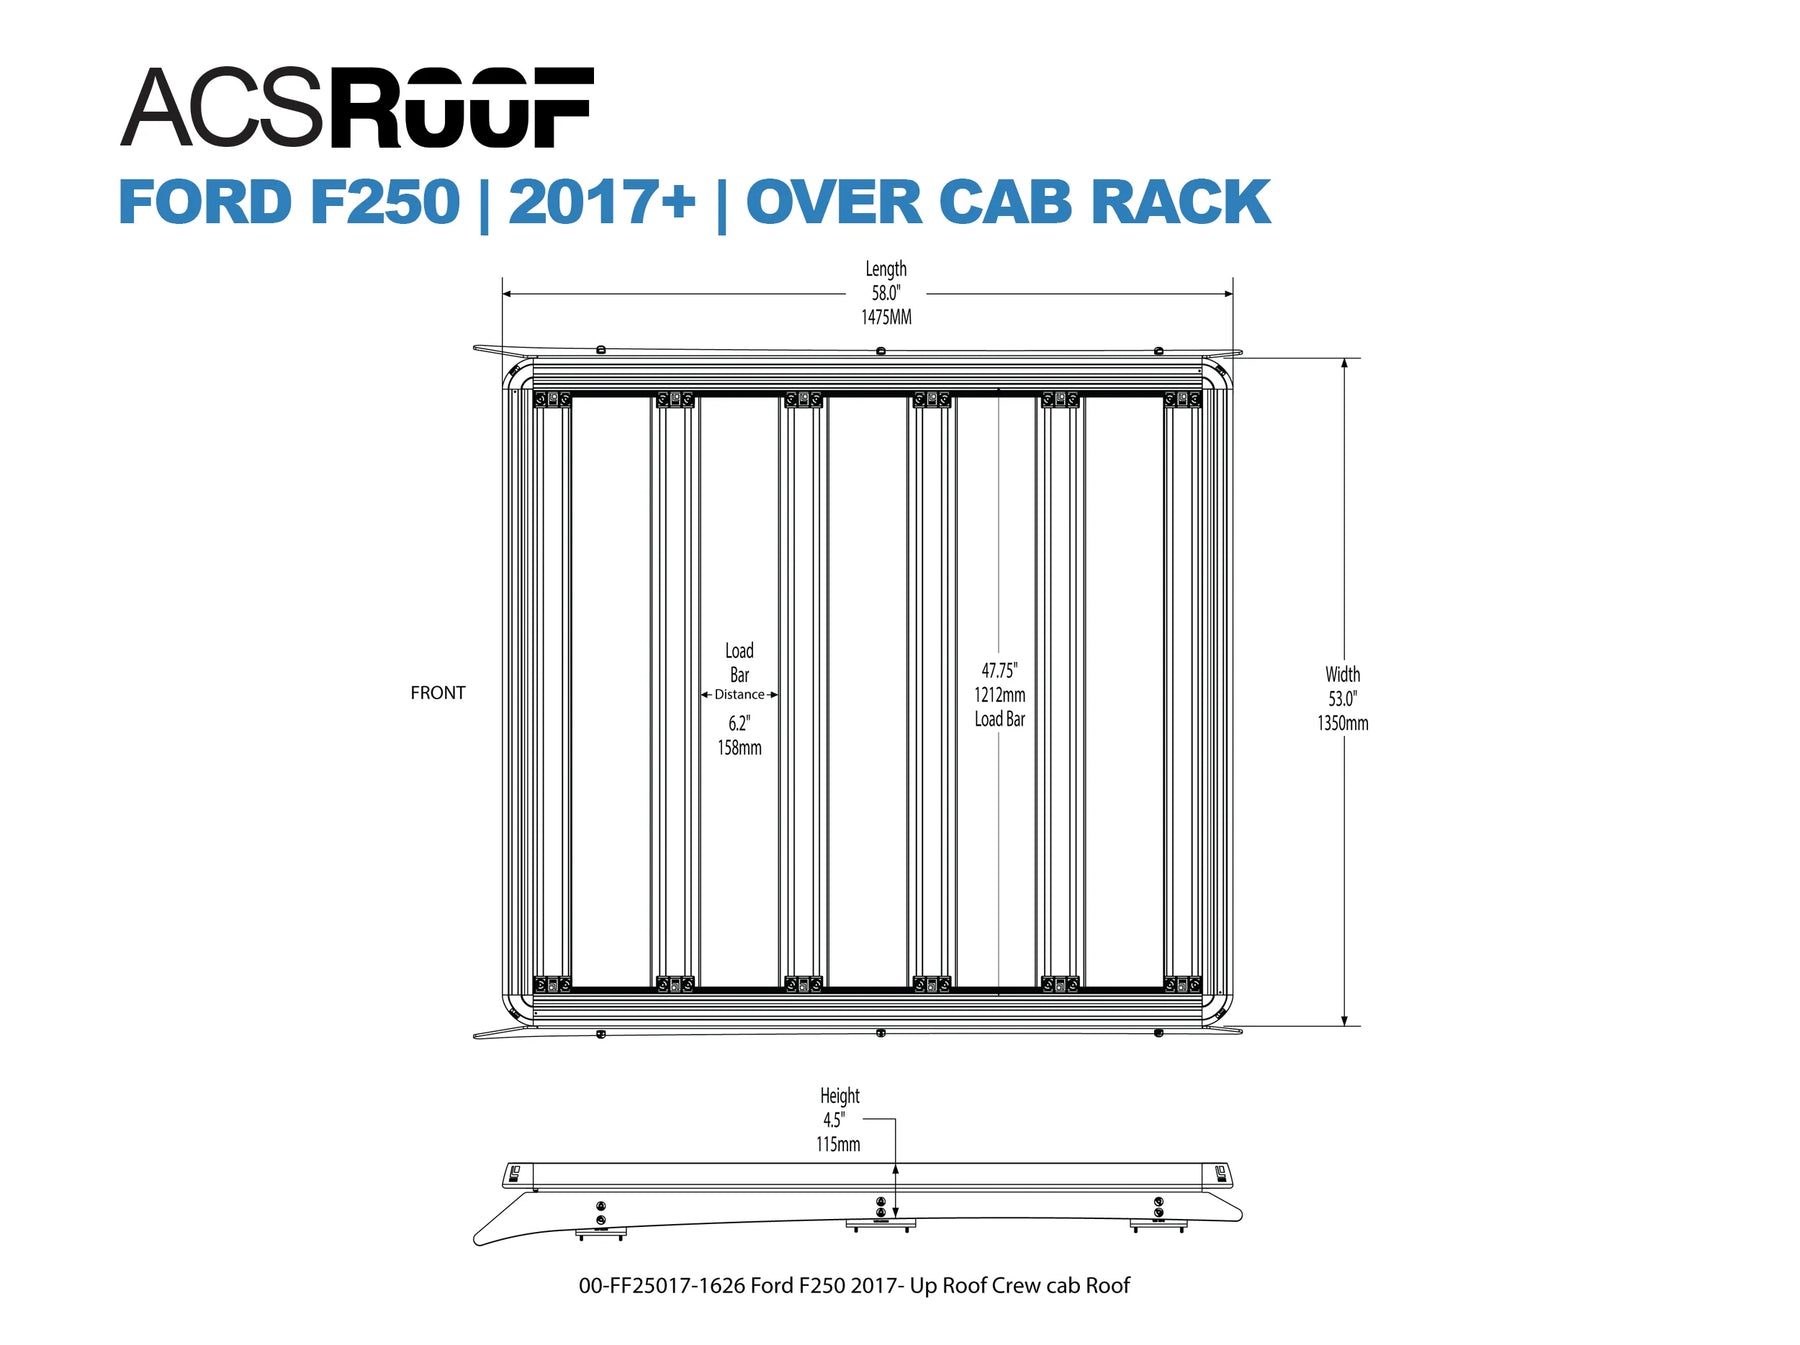 ACS ROOF Over Cab Platform Rack FORD F250 - 2017+ | Over Cab Platform Rack Platform Rack Leitner Designs- Adventure Imports